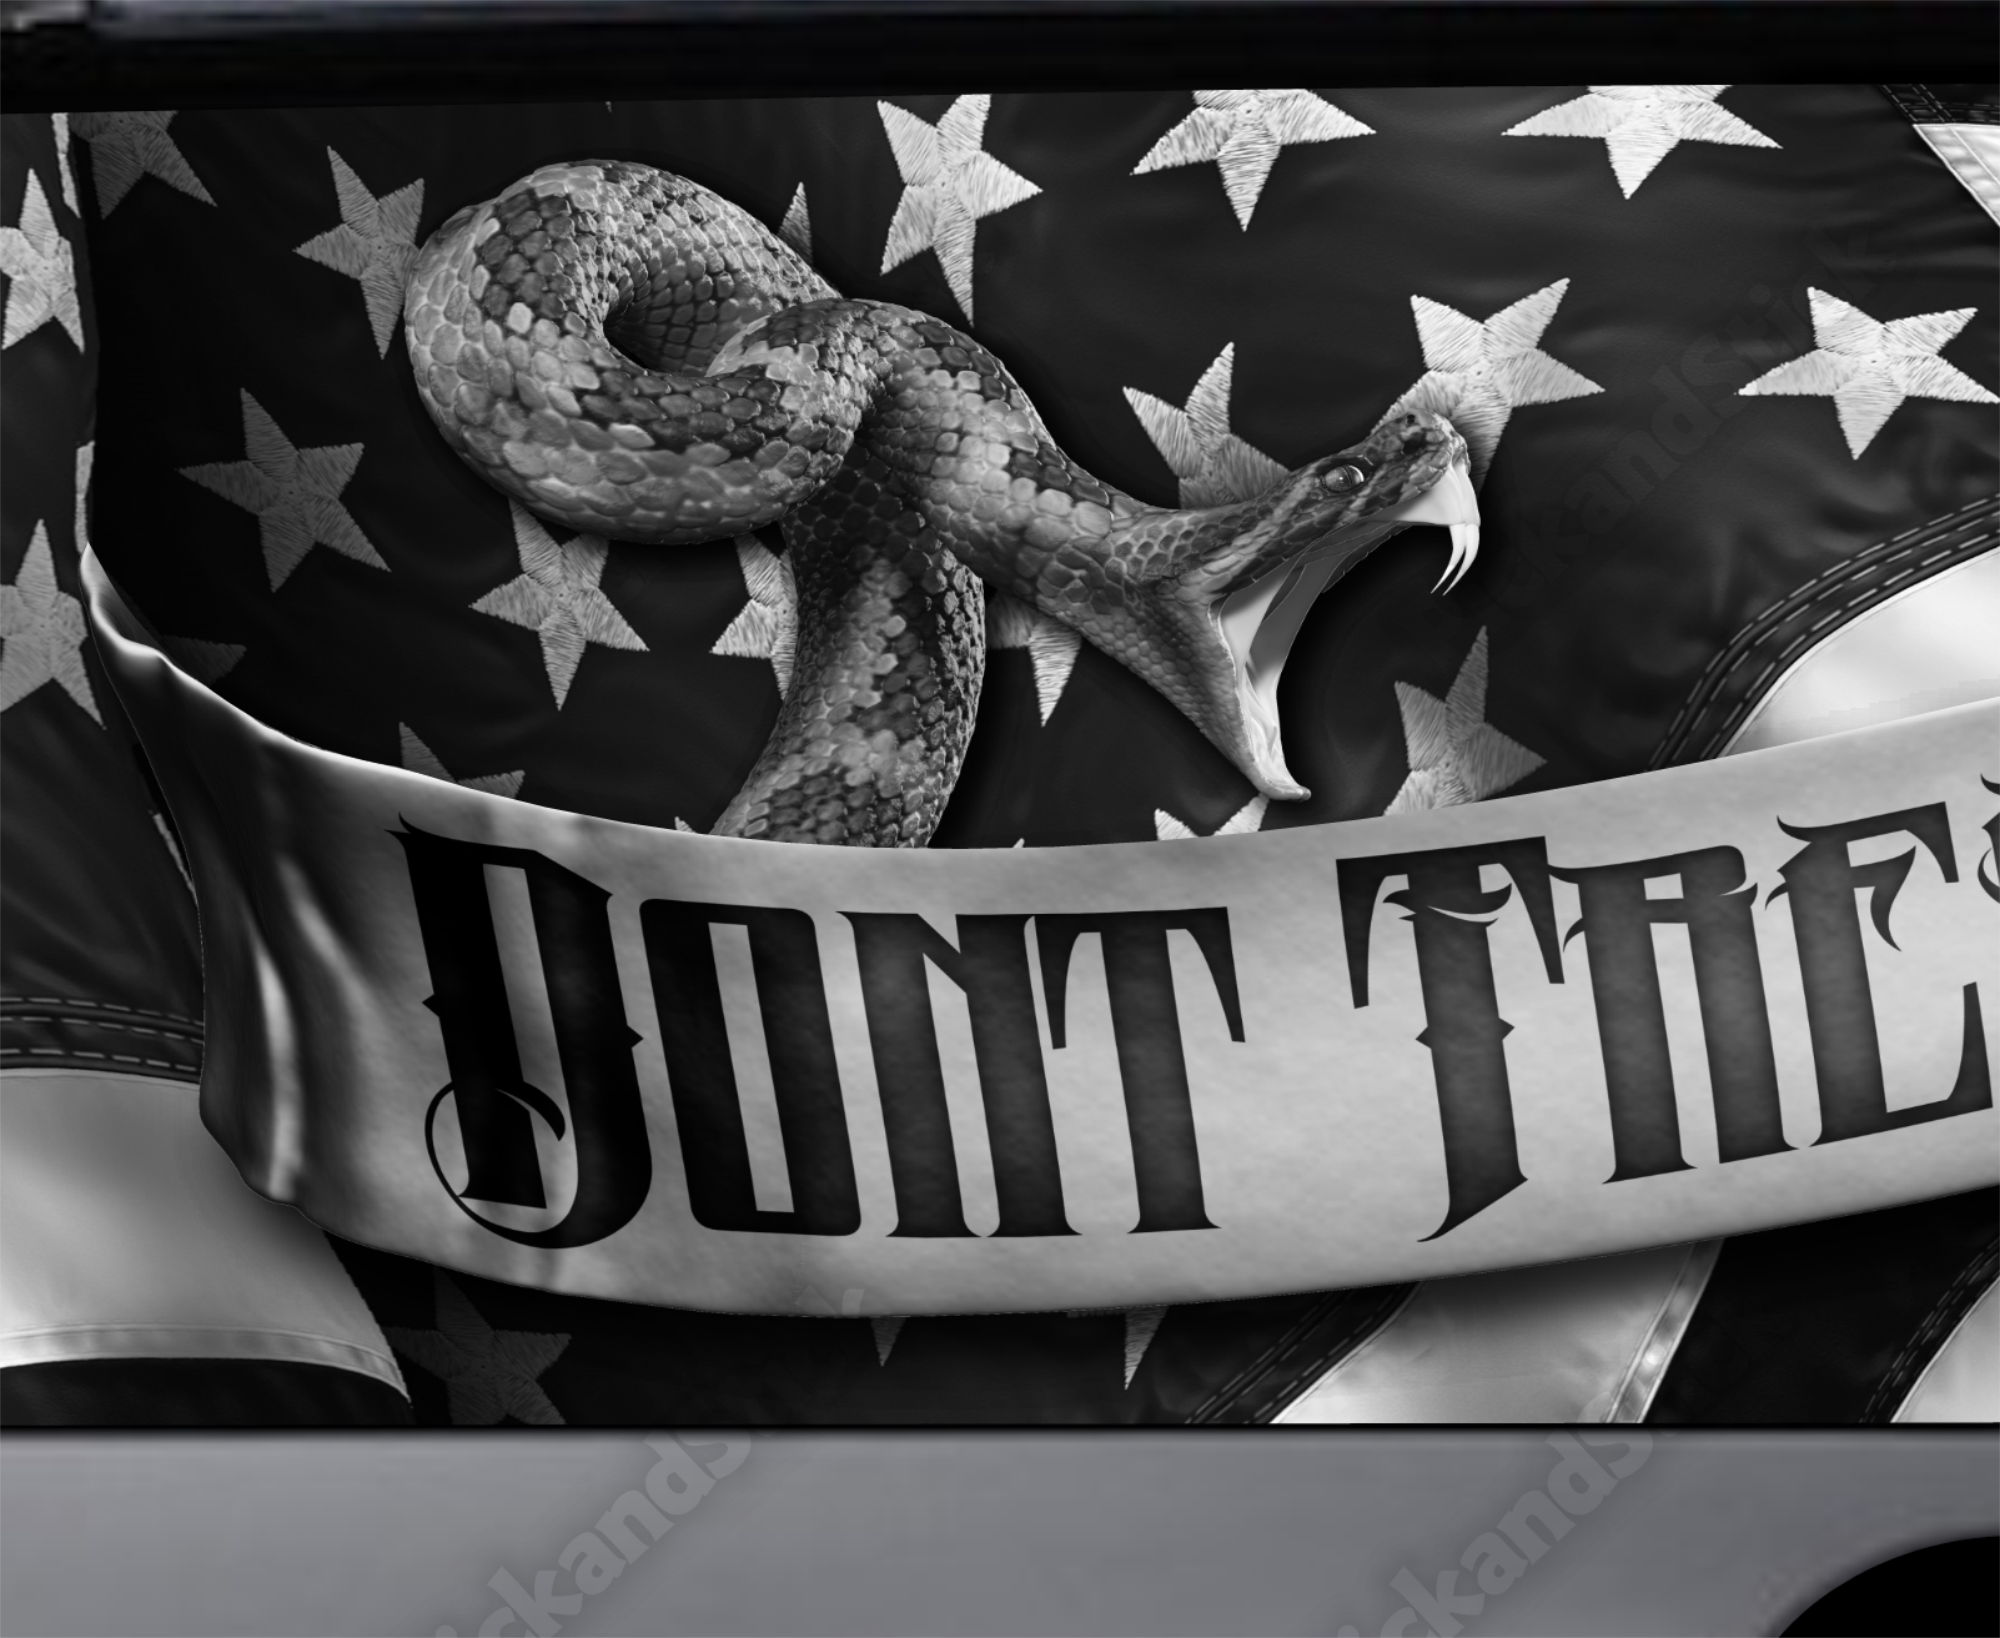 Don't Tread Me With Snake On American Flag - Black and White - Perforated Rear Window Decal - PickandStickcom